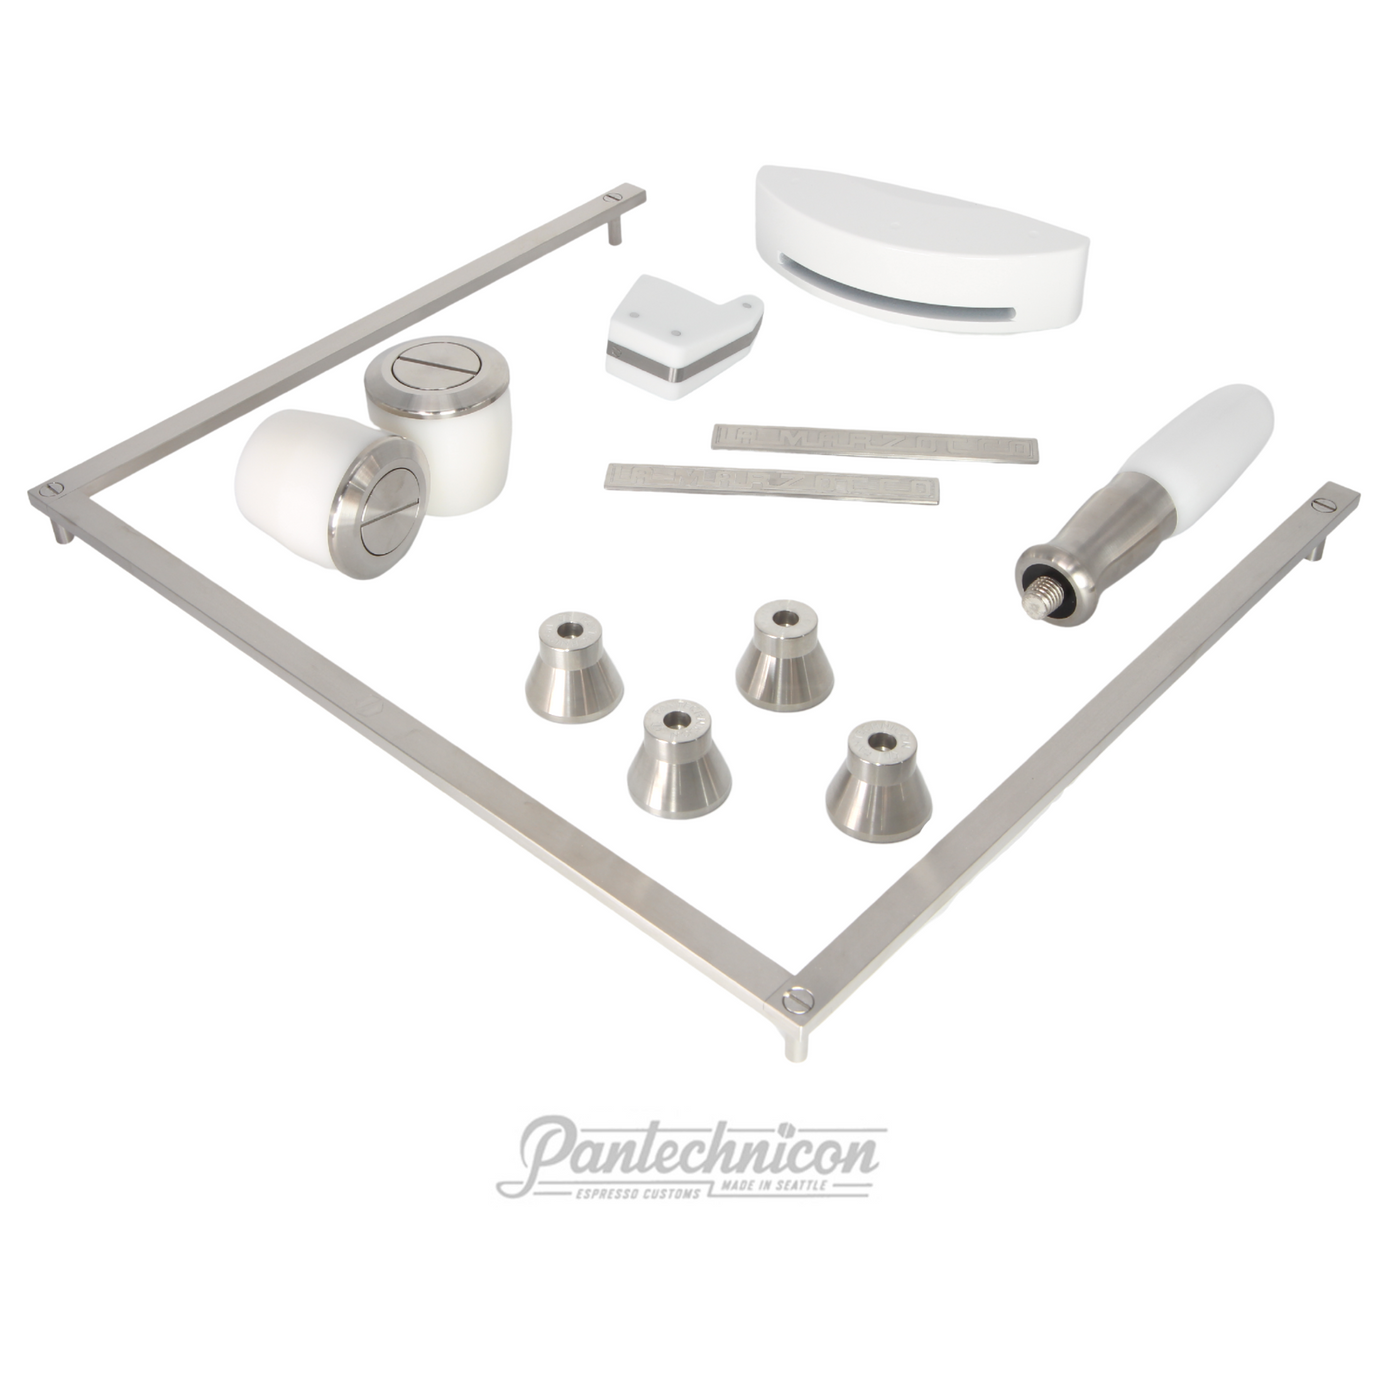 complete kit for linea mini in white, standard legs, handle only